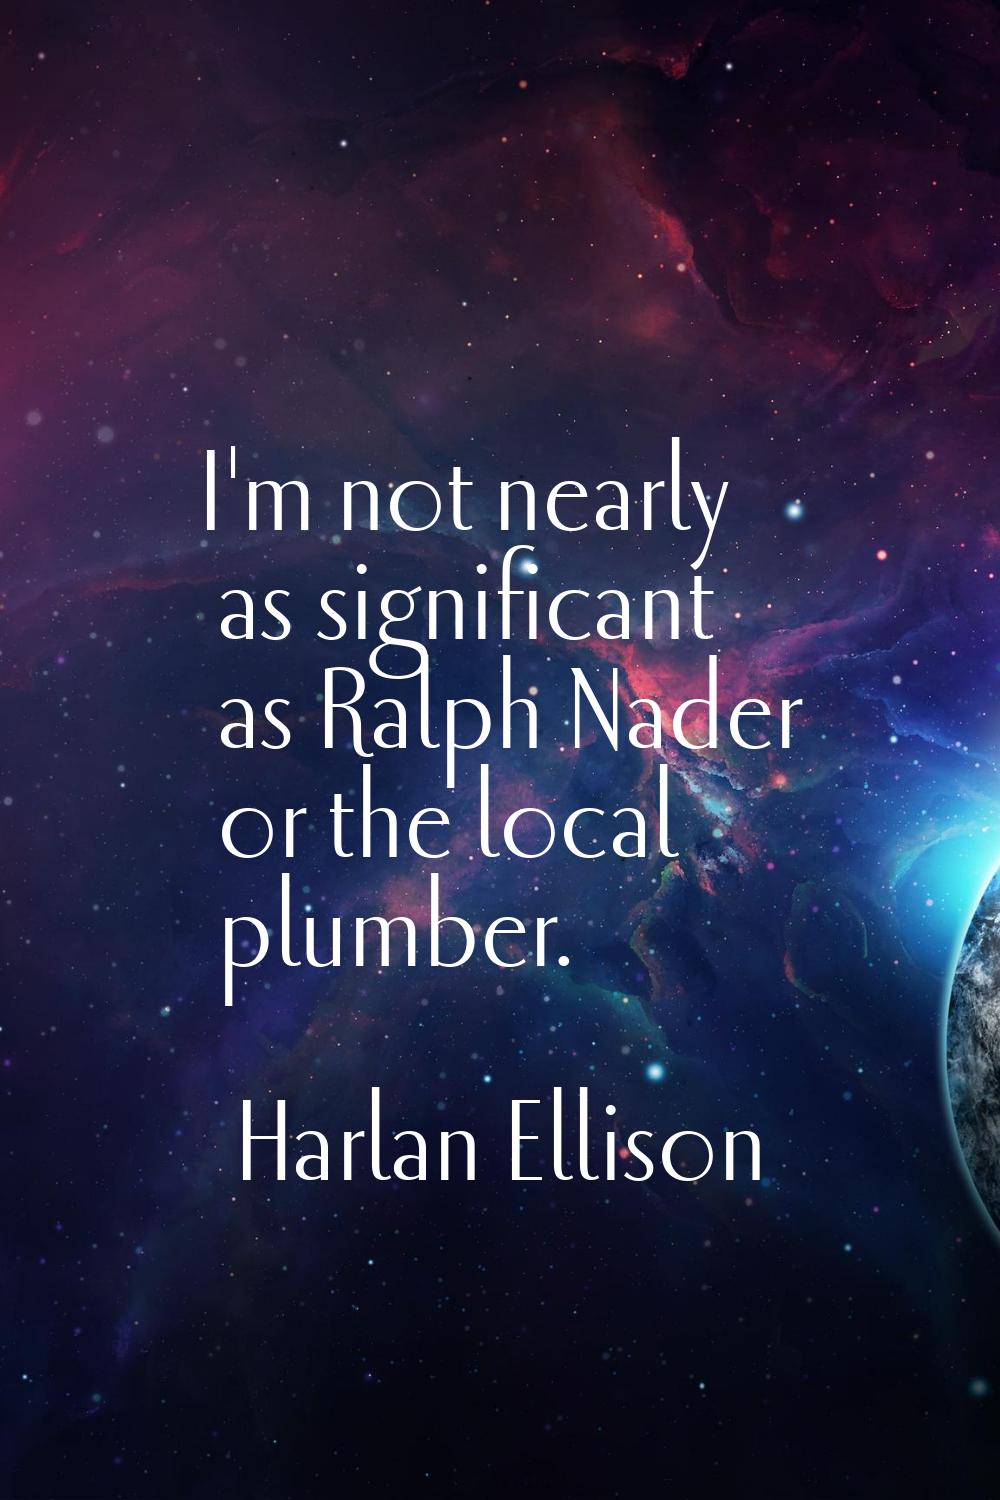 I'm not nearly as significant as Ralph Nader or the local plumber.